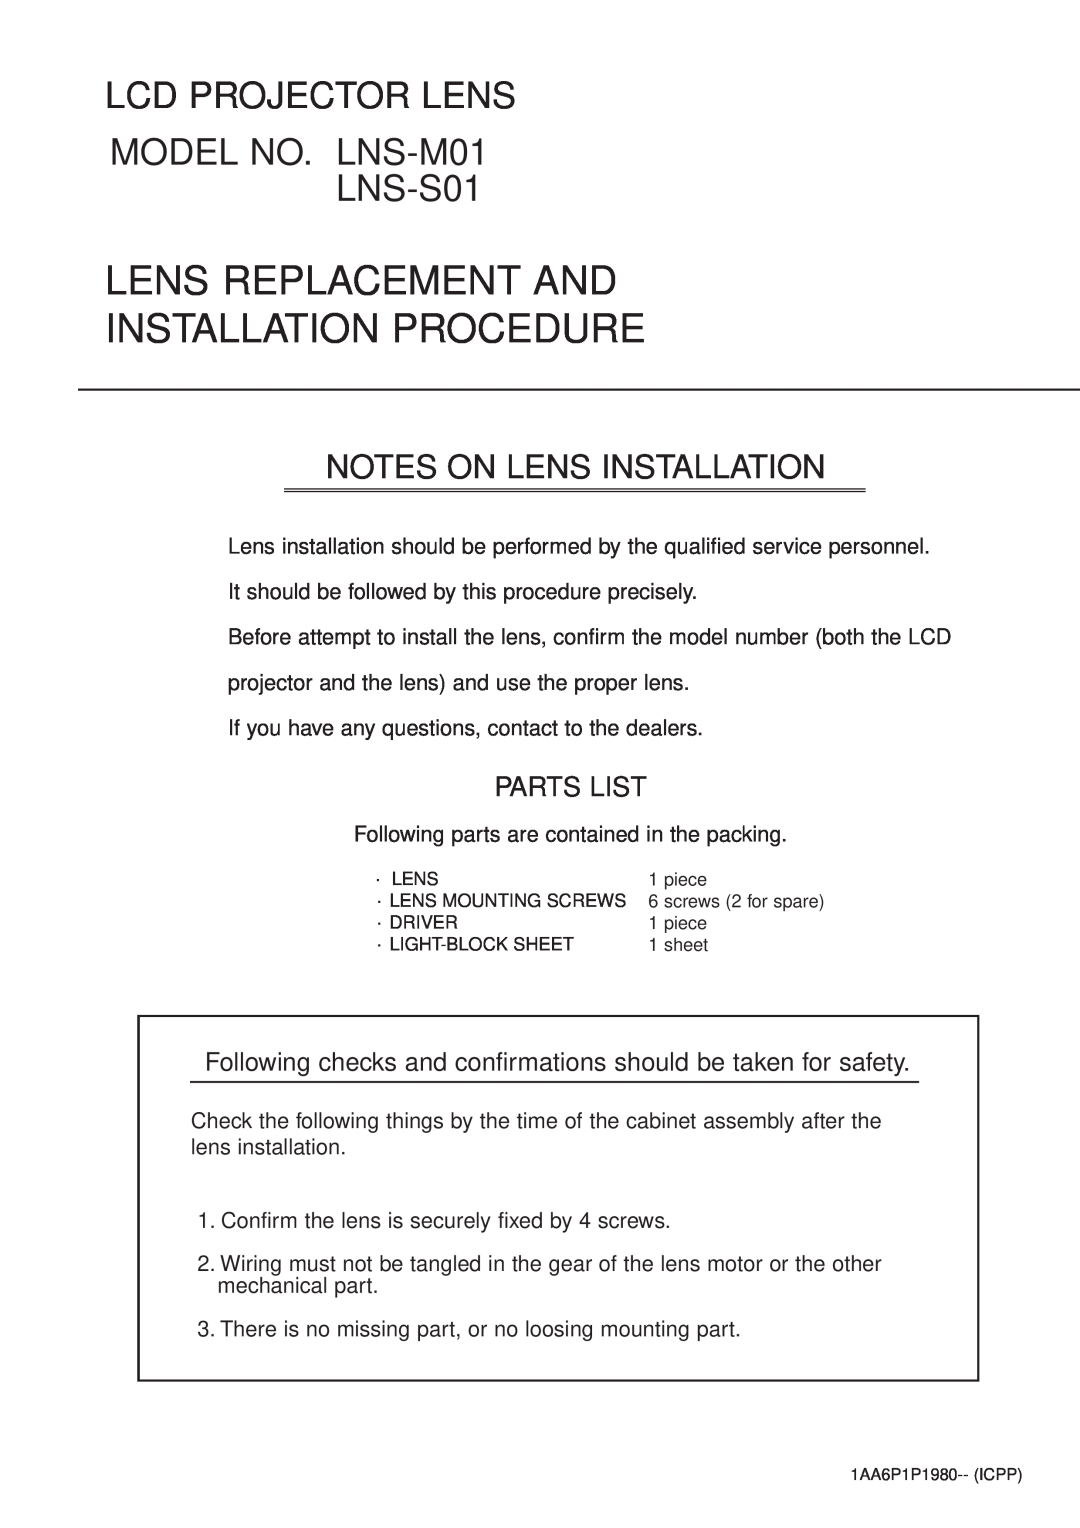 Sanyo LNS-M01 manual Notes On Lens Installation, Following checks and confirmations should be taken for safety, Parts List 